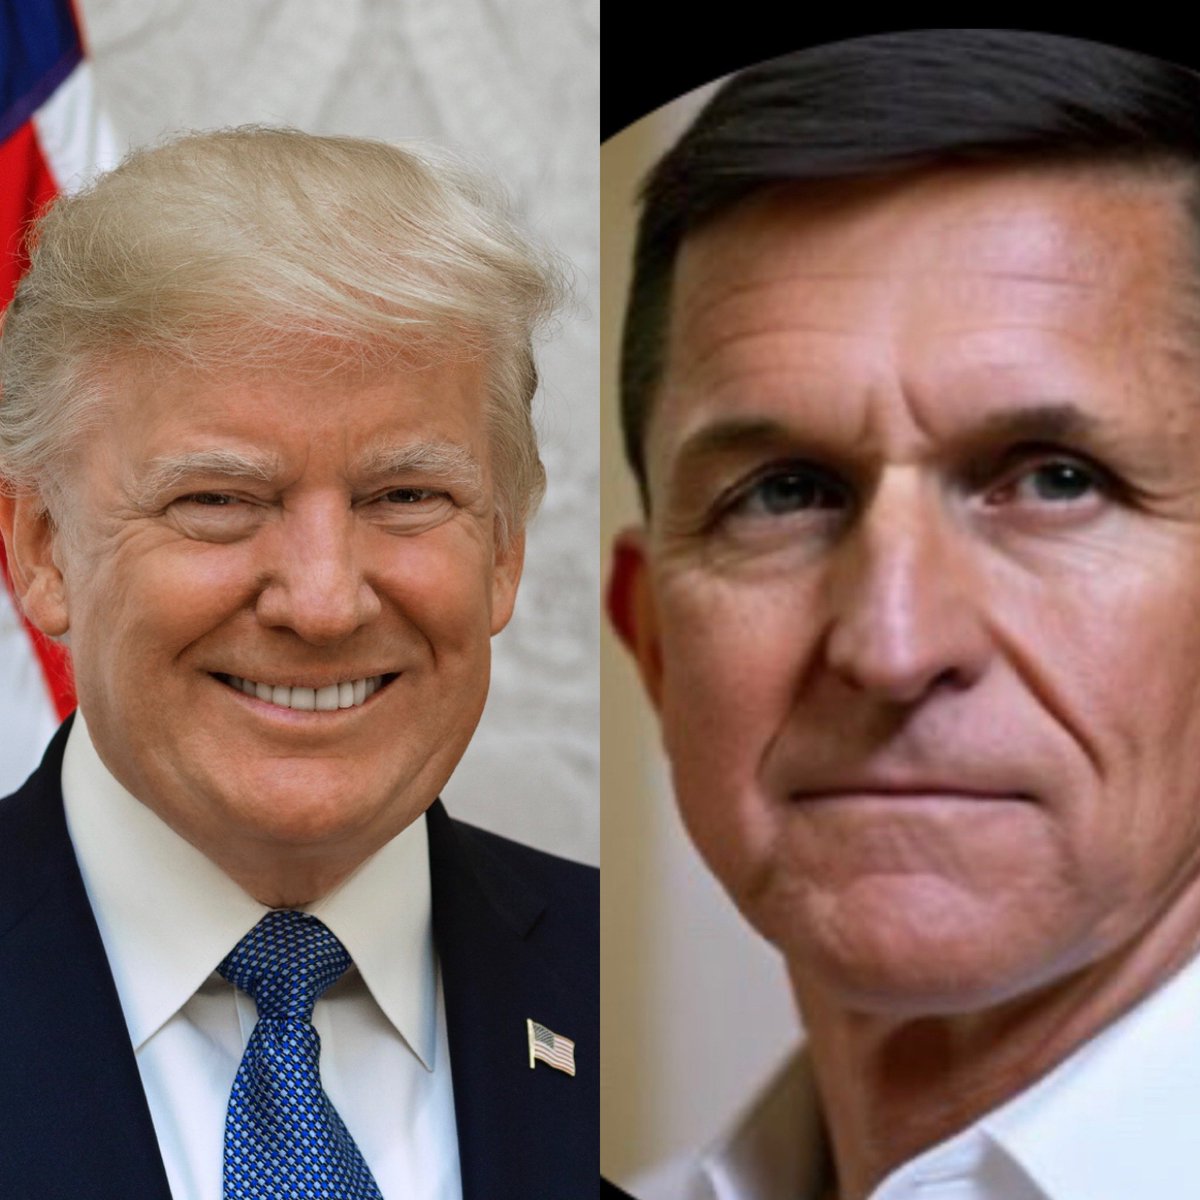 This needs to be our 2024 ticket. There are many great VP picks but I think @GenFlynn would be the best to clean up our corrupt justice system.